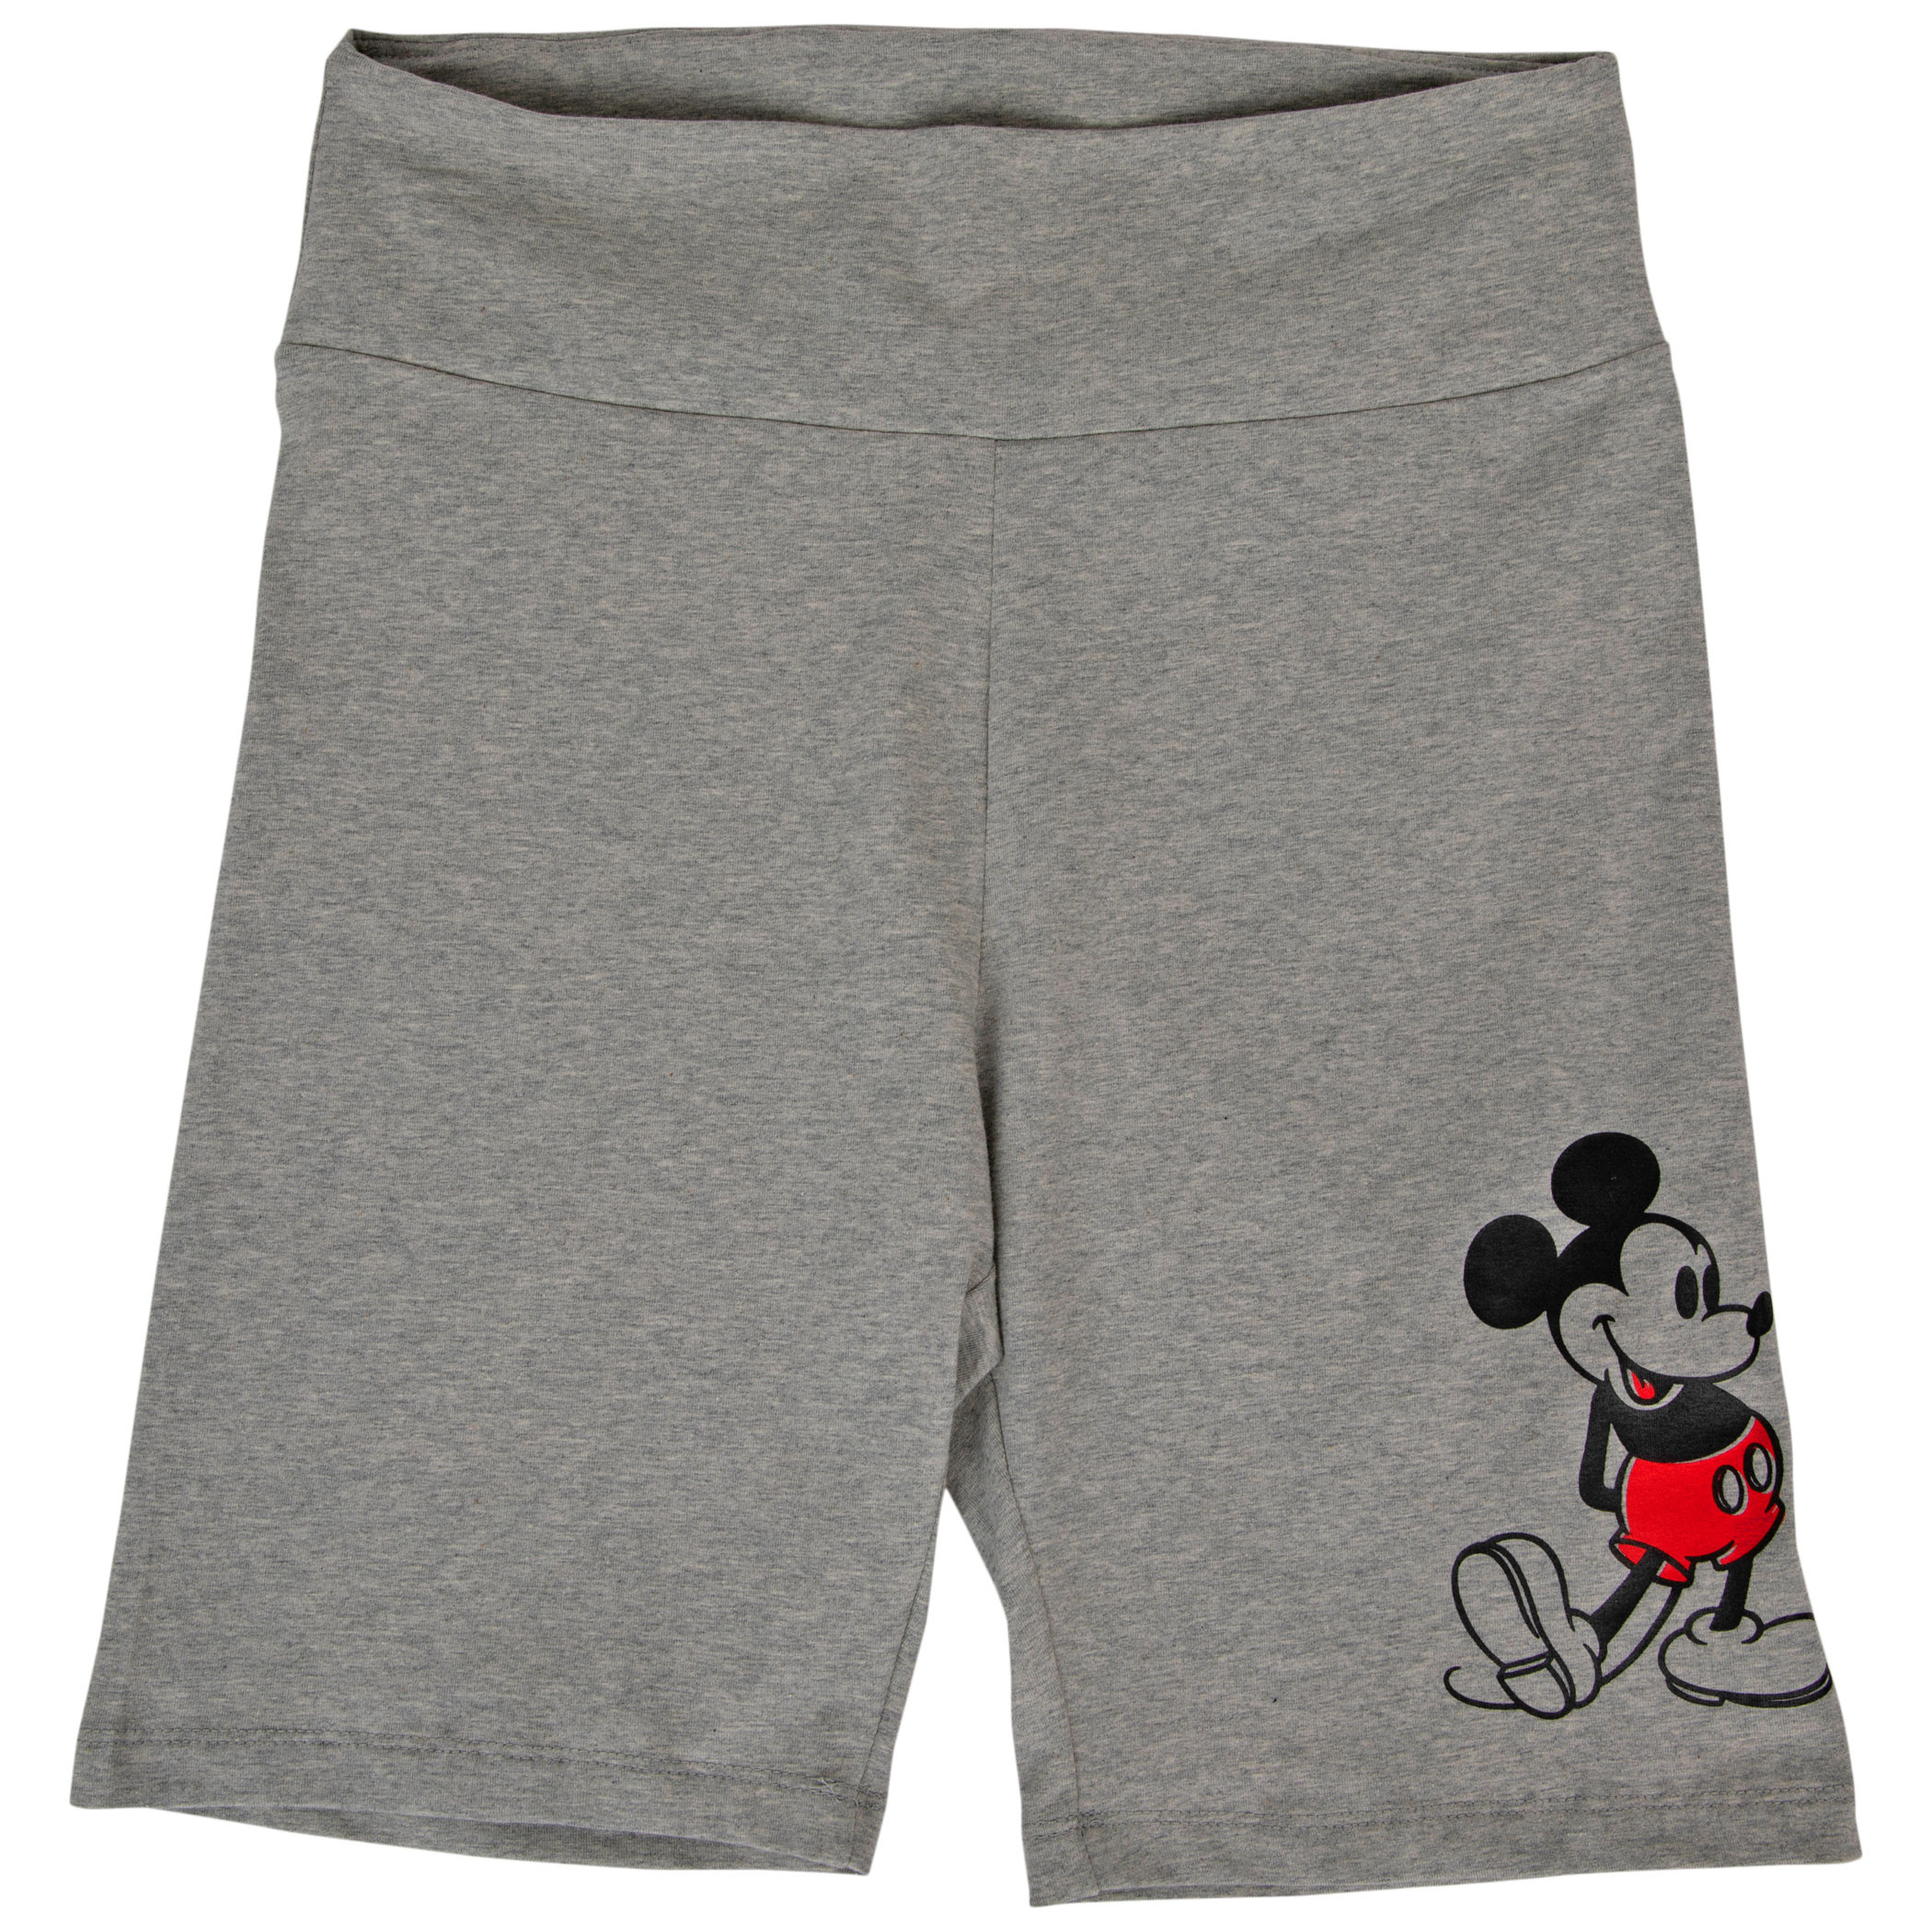 Disney Mickey Mouse Golly Expression Pose Women's Biker Shorts